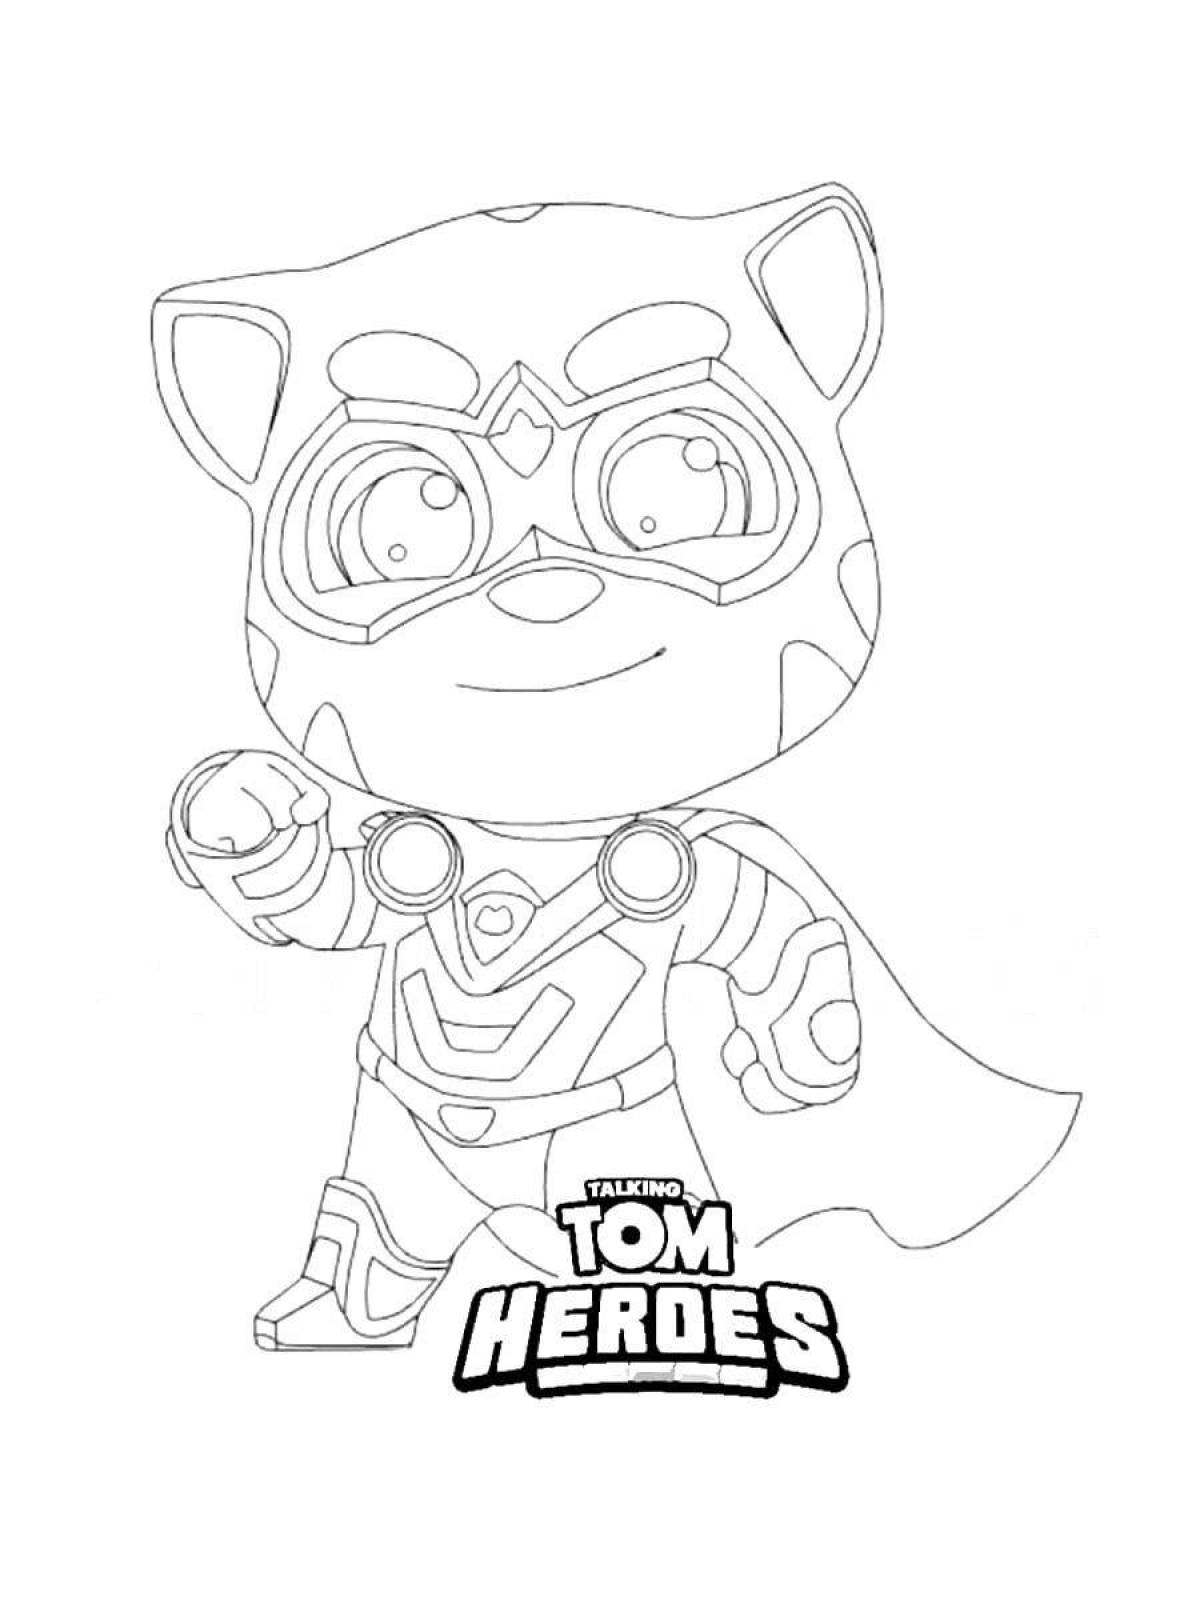 Color-lush talking tom hero coloring page